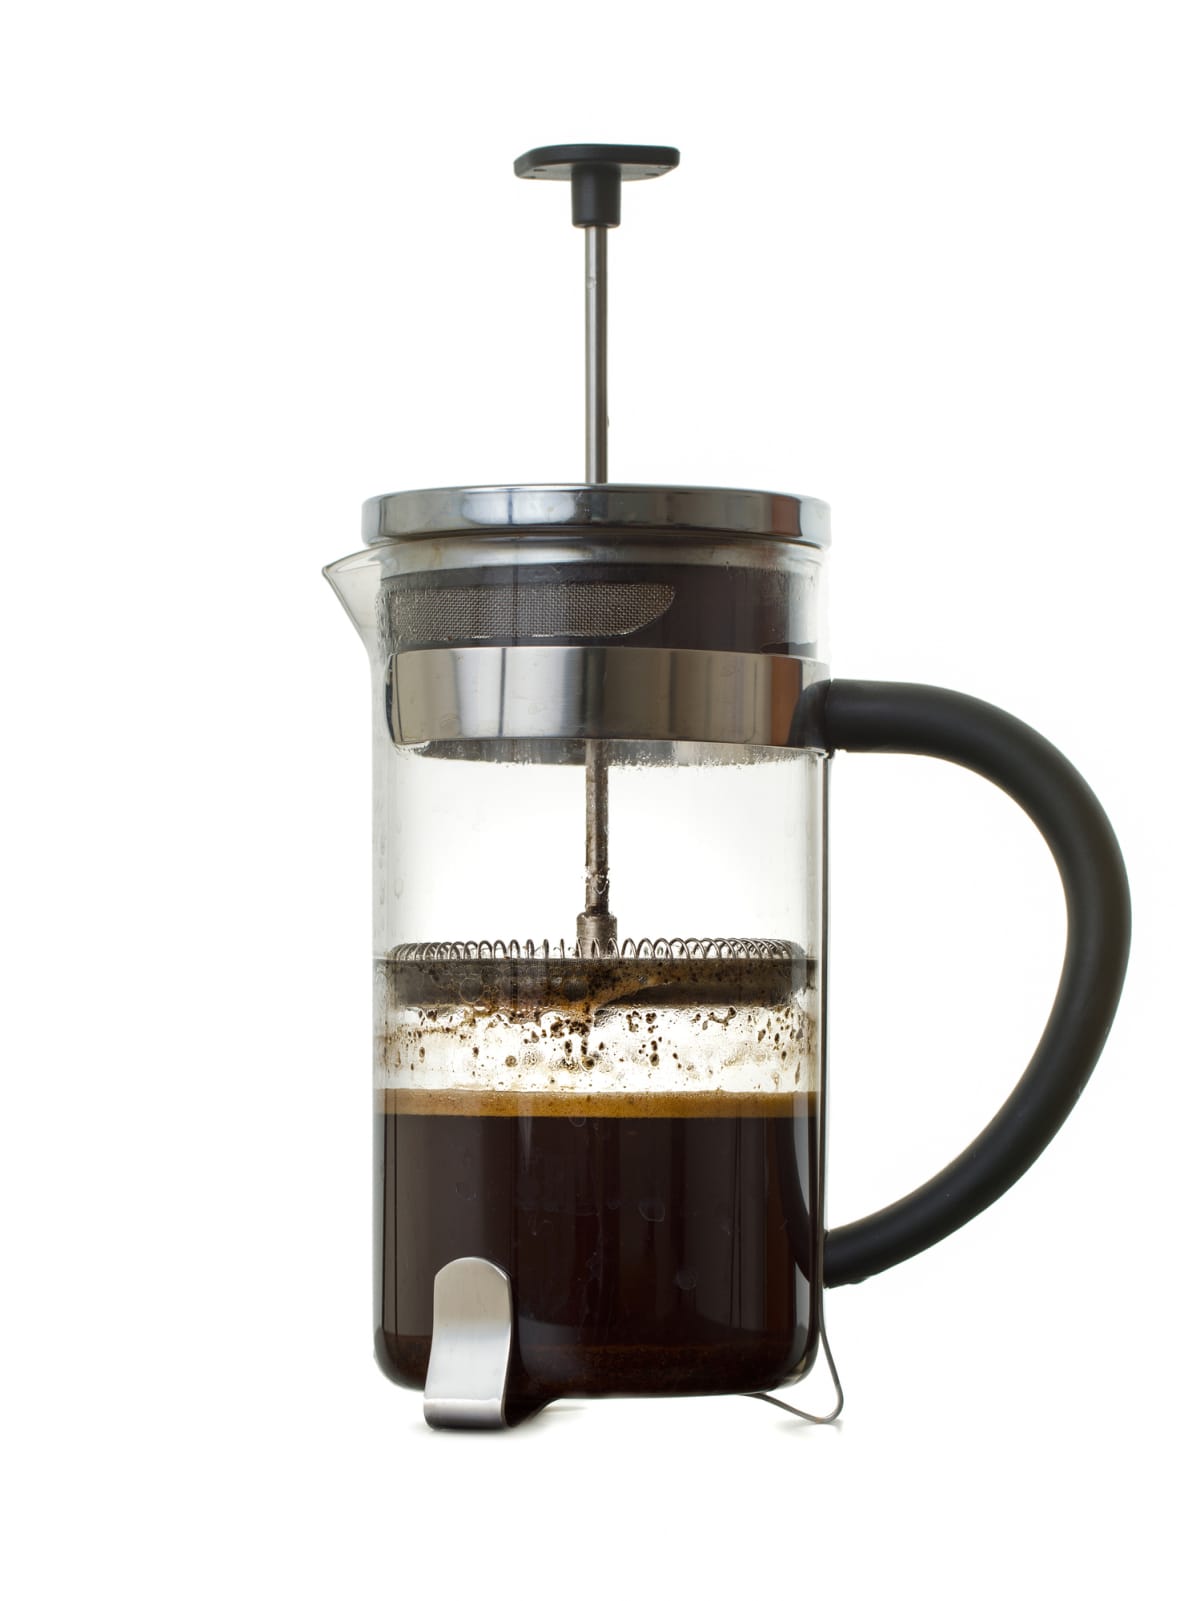 French press coffee maker on white background